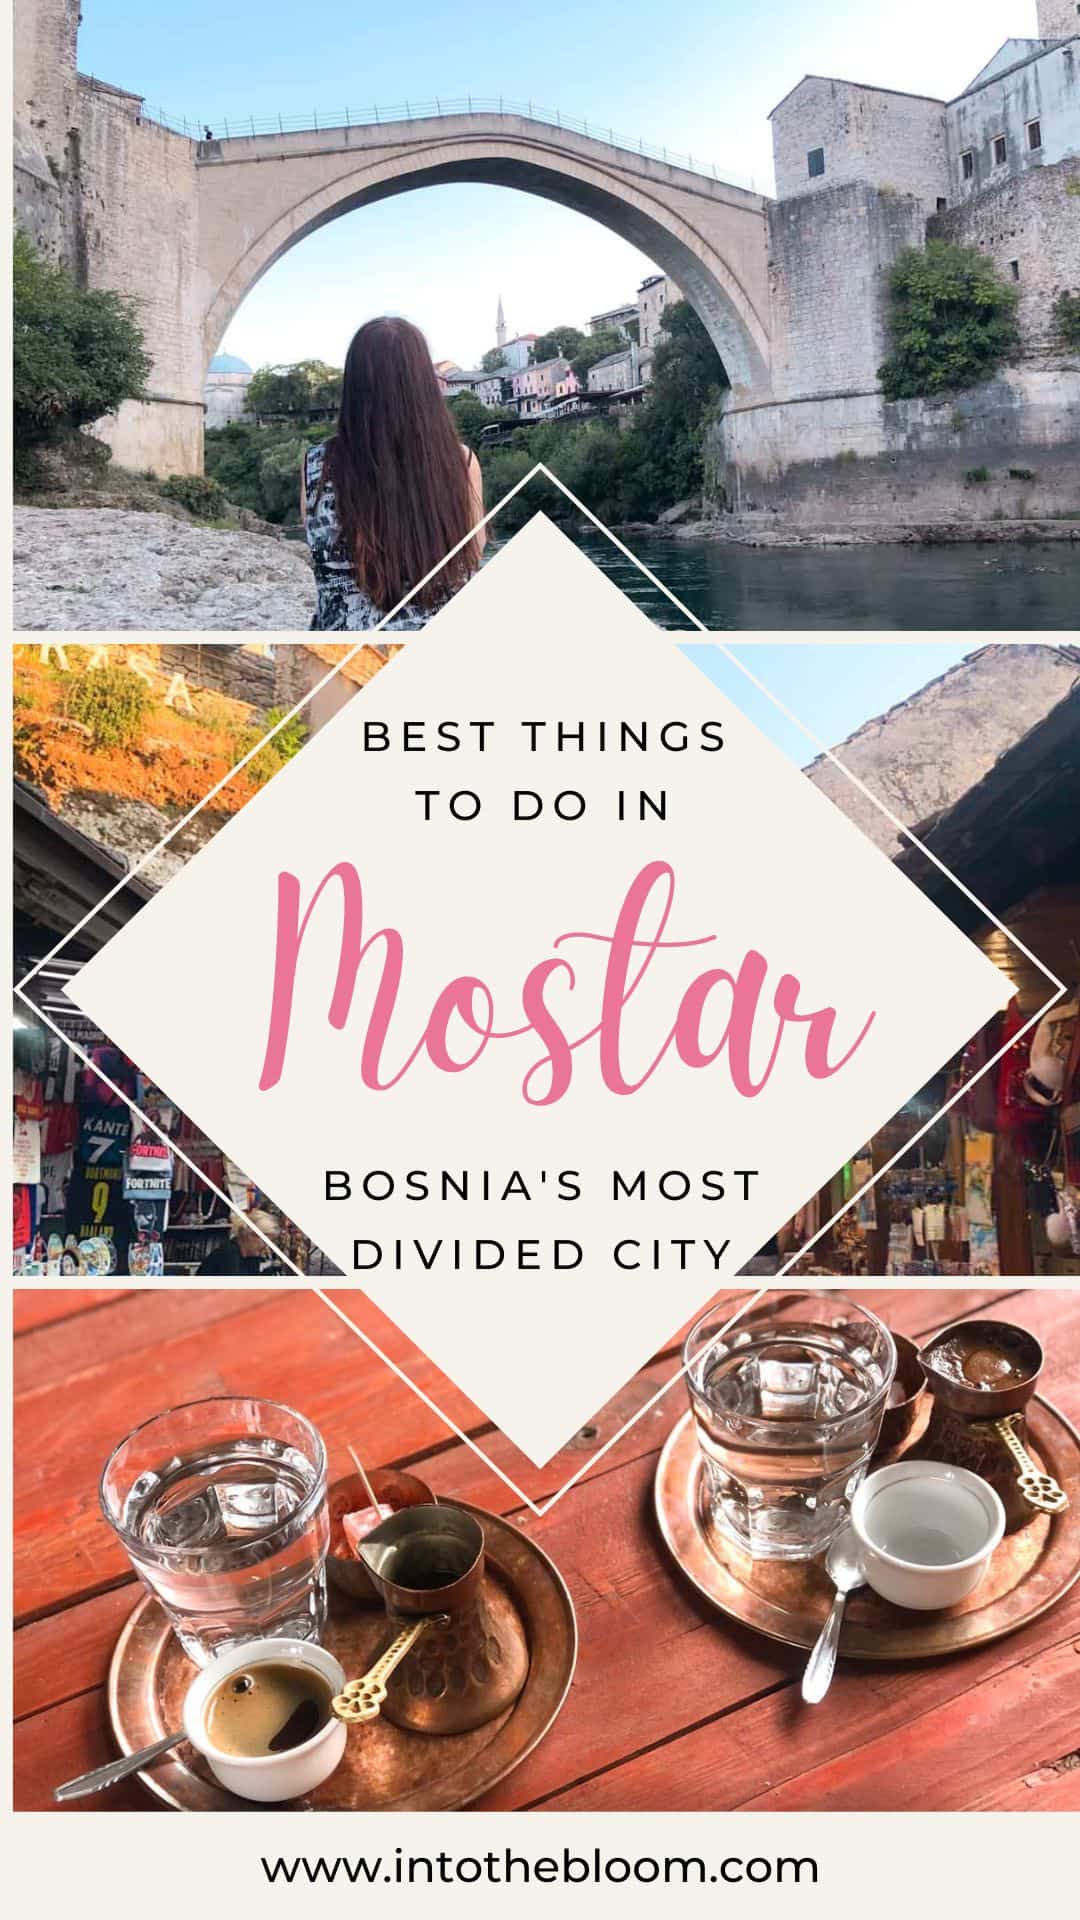 Best things to do in Mostar, Bosnia's most divided city - Mostar Travel Guide